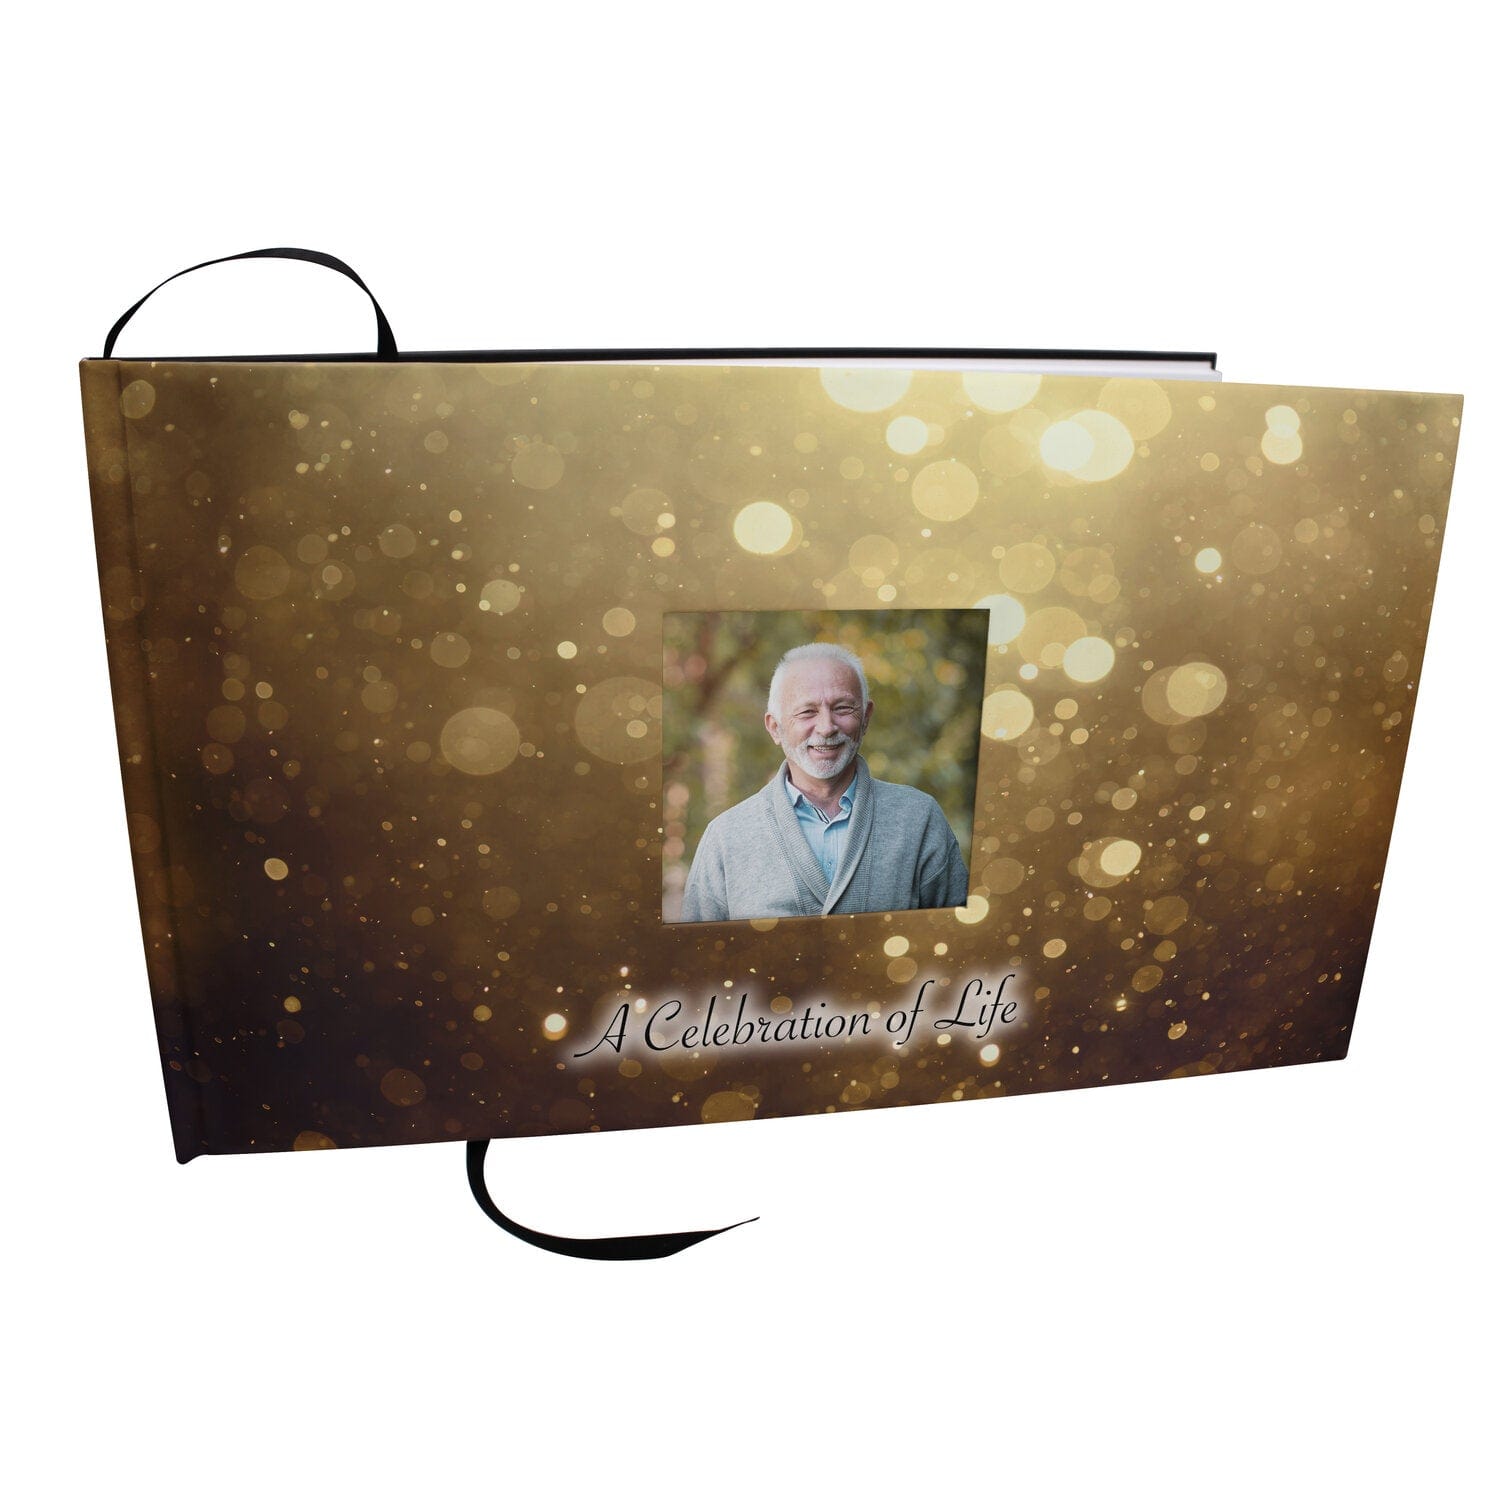 Commemorative Cremation Urns Gold Cross Matching Themed 'Celebration of Life' Guest Book for Funeral or Memorial Service